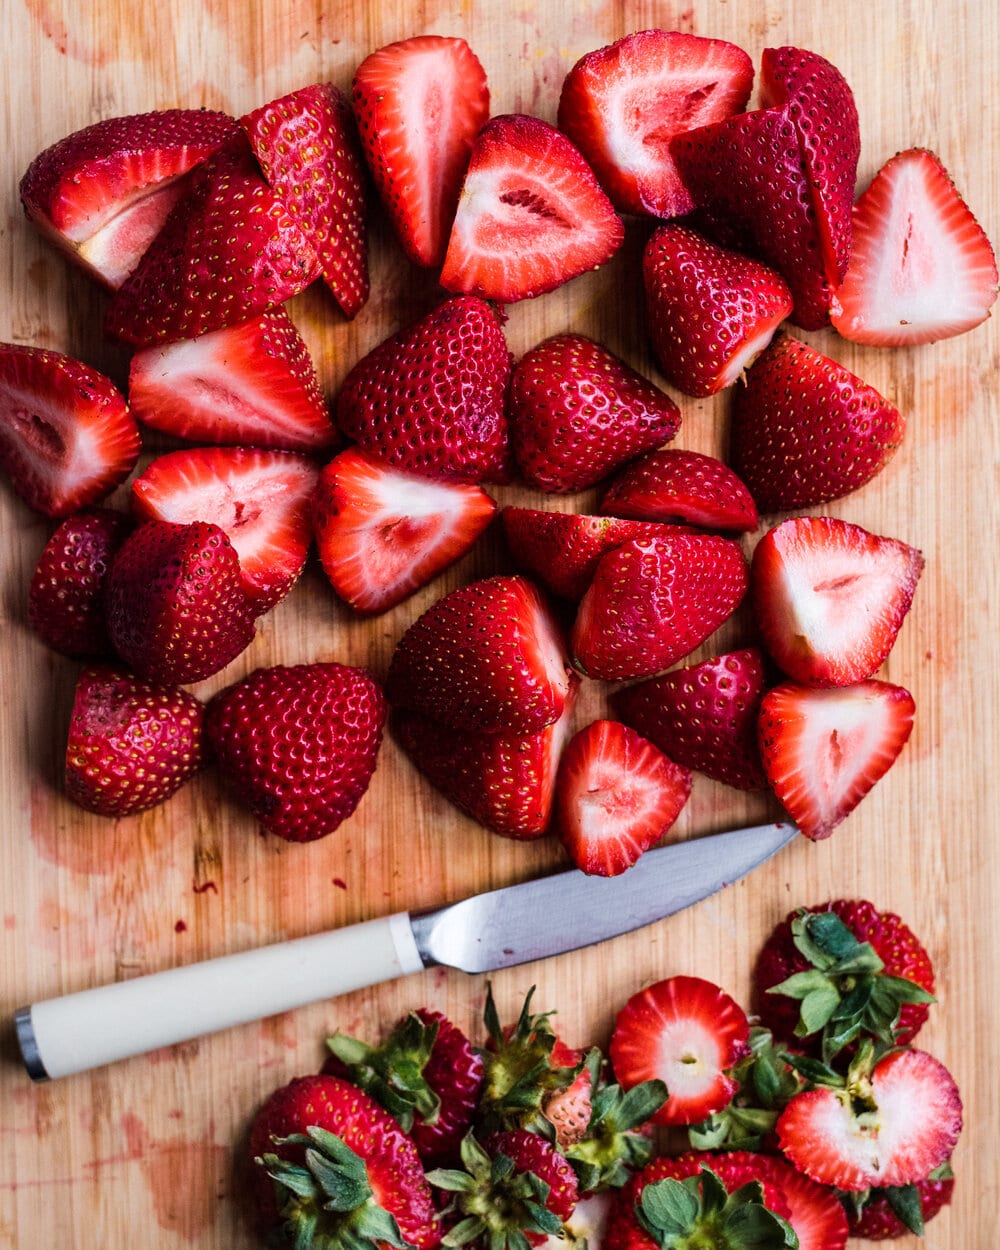 Halved strawberries, cut strawberry tops and a knife on a cutting board.